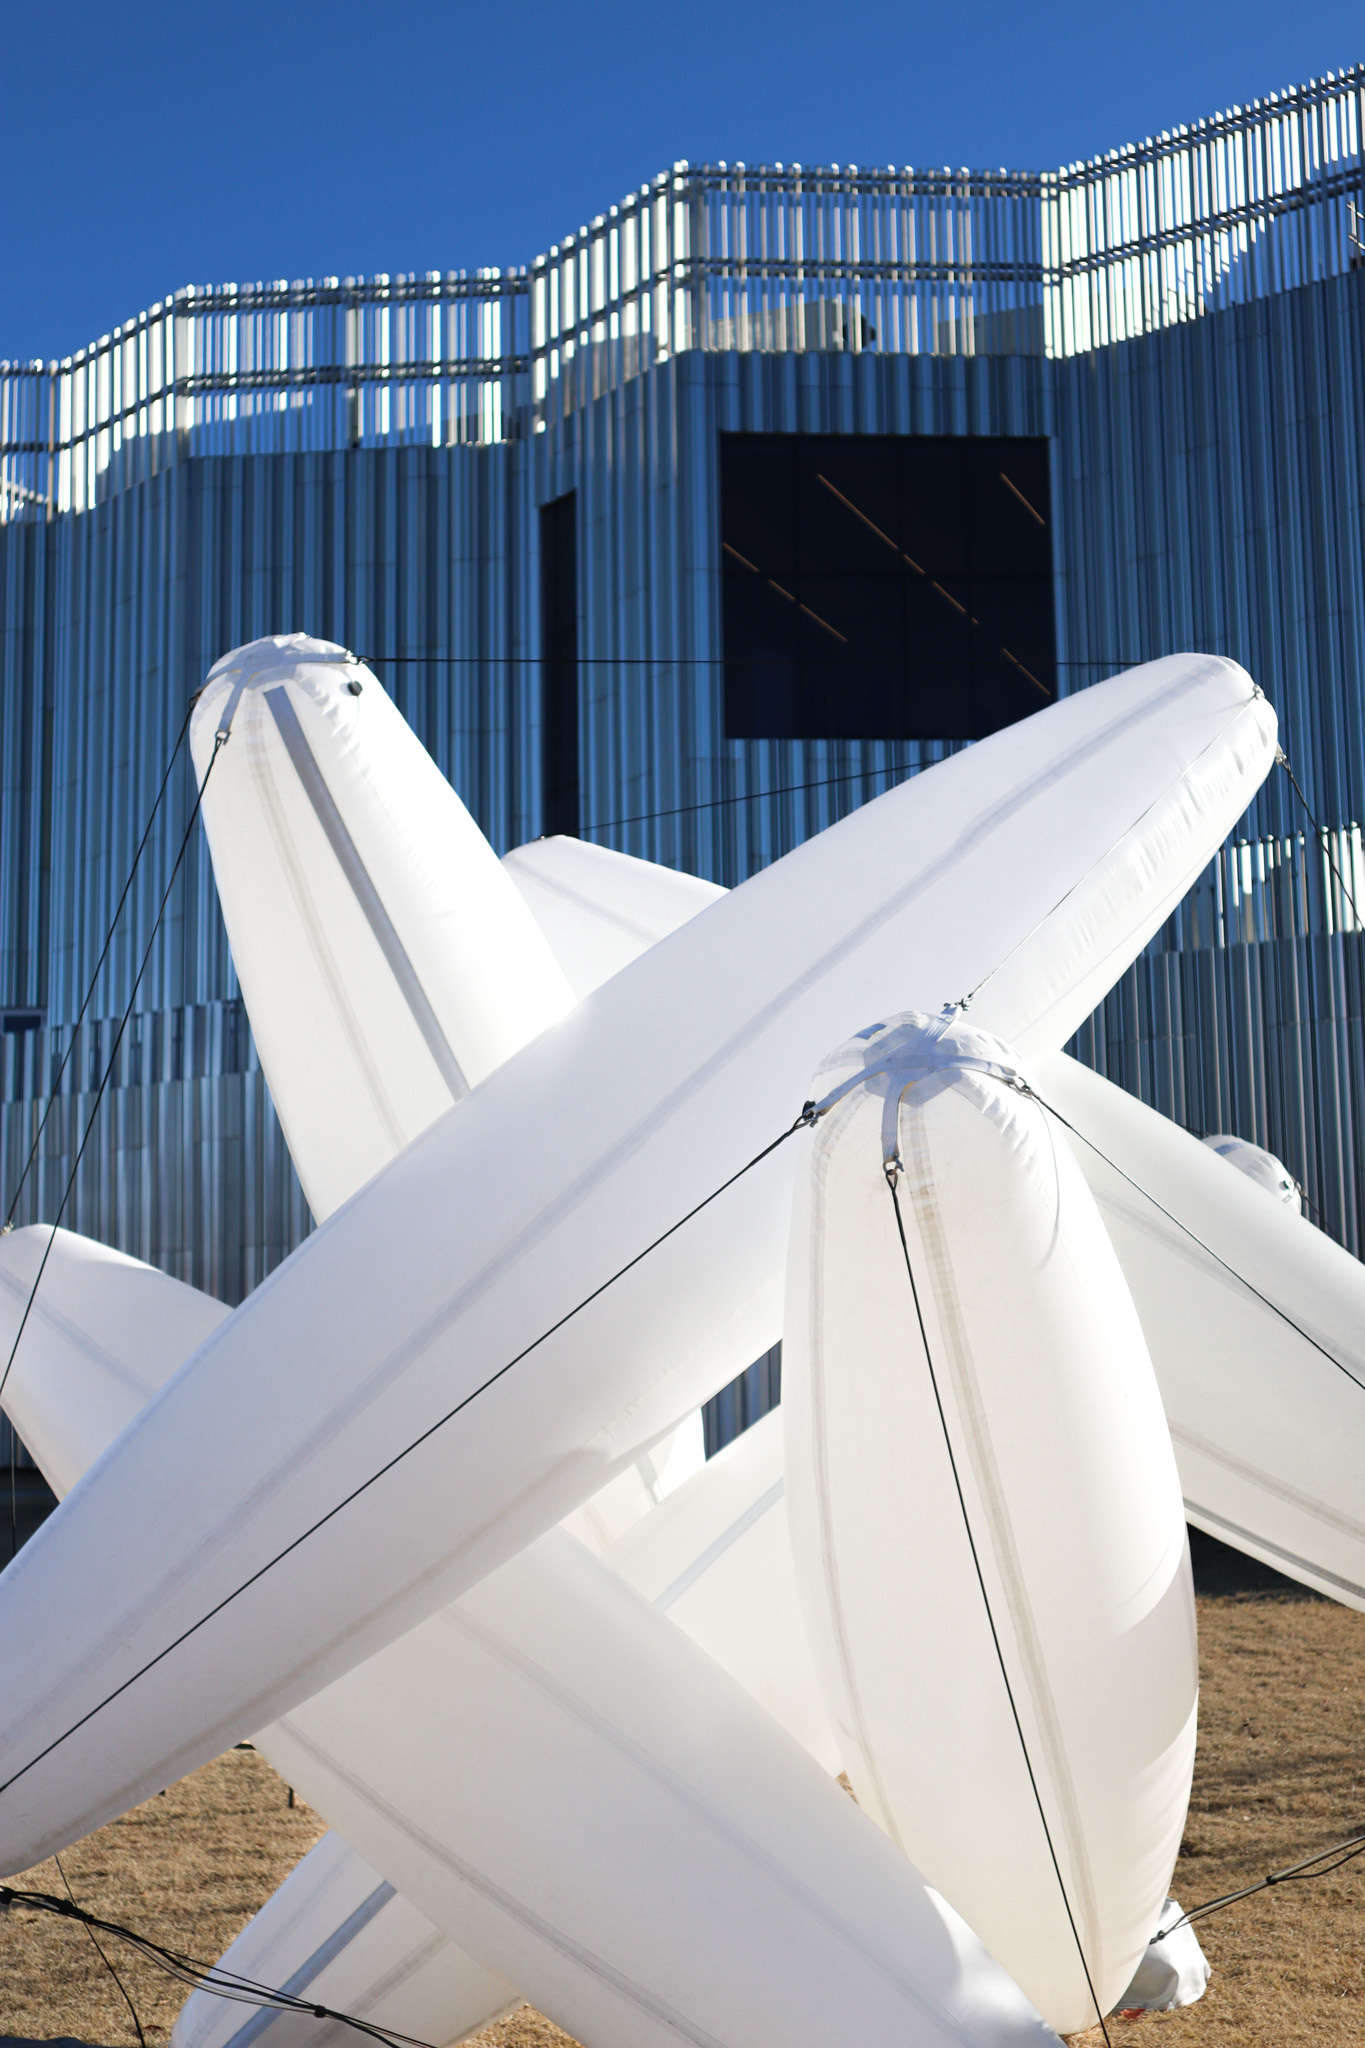 Inflatable white cylindrical forms balanced in front of a silver building